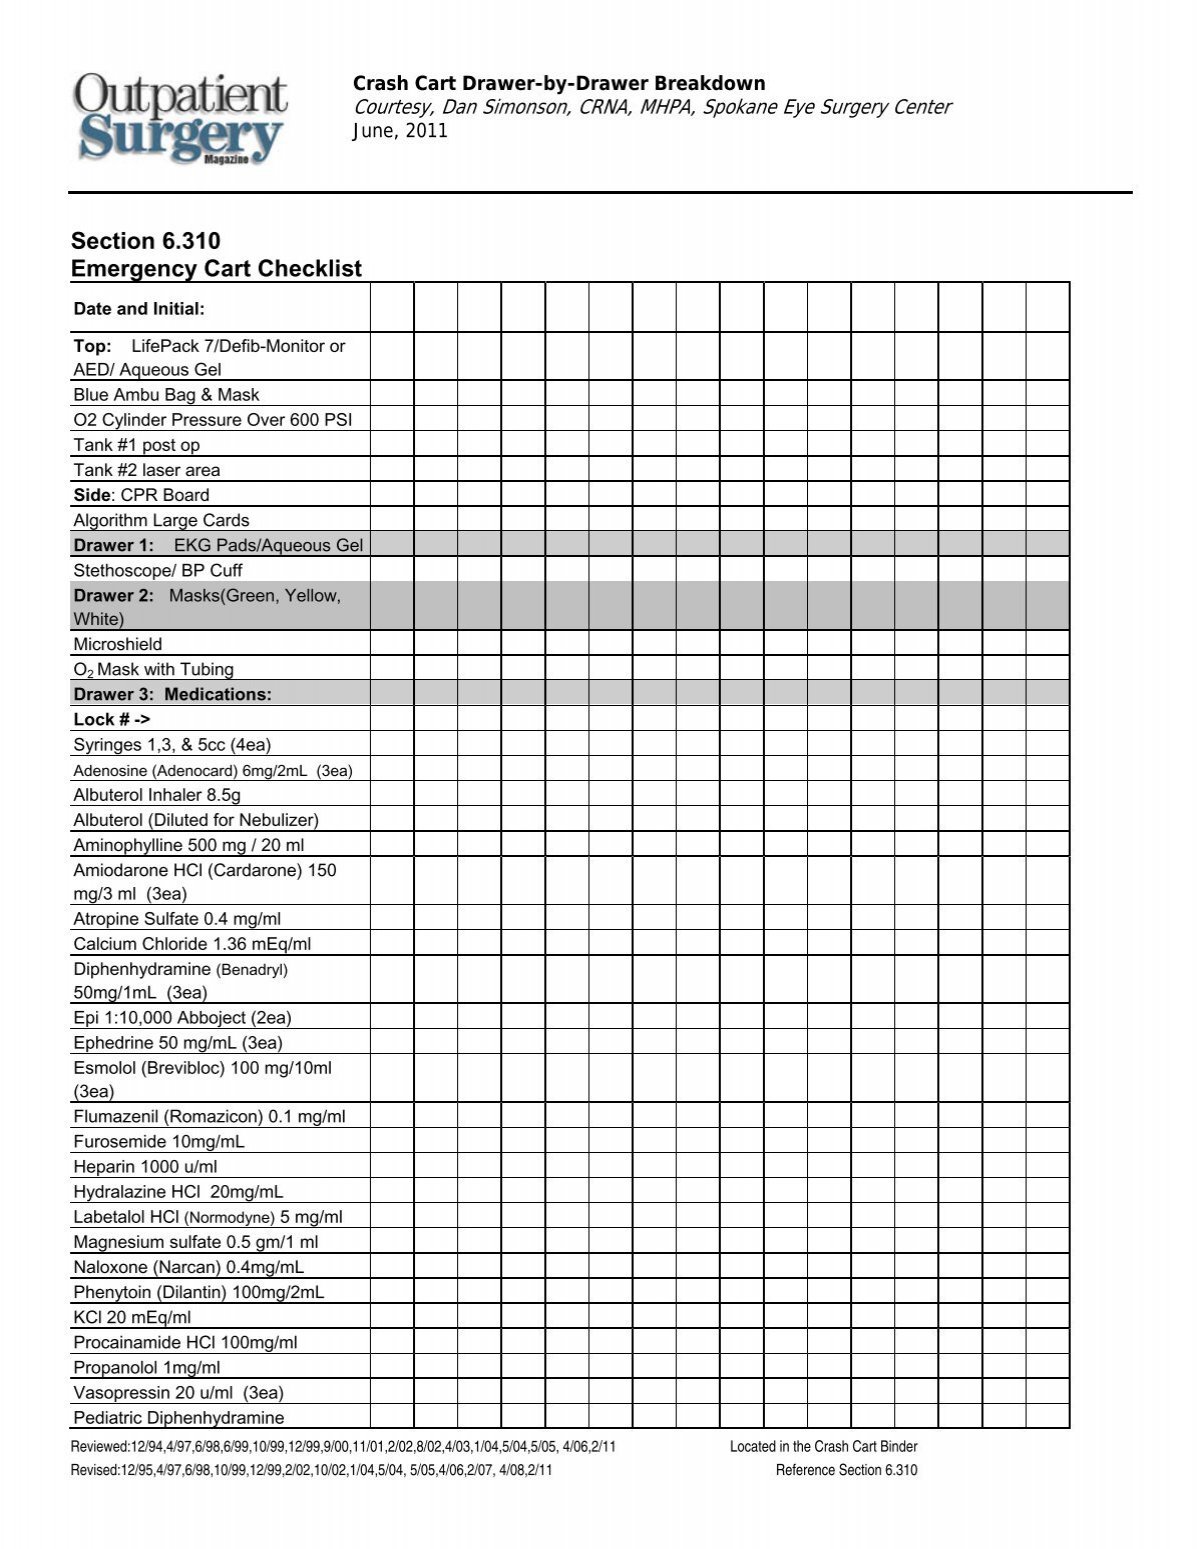 section-6-310-emergency-cart-checklist-outpatient-surgery